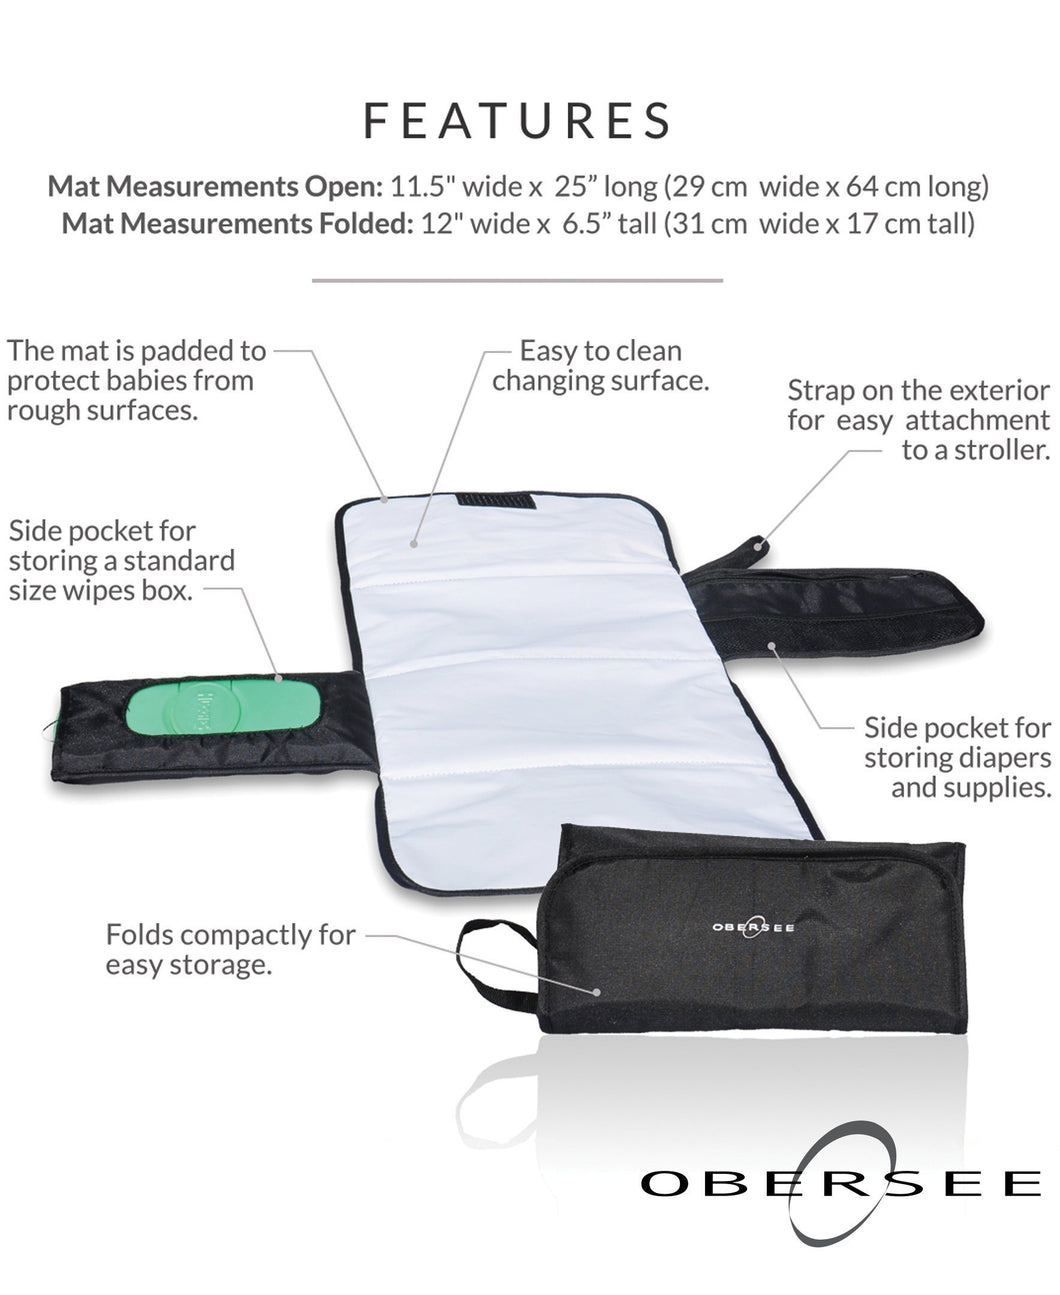 Obersee Voila Compact Changing Kit | Changing Pad | easy to clean